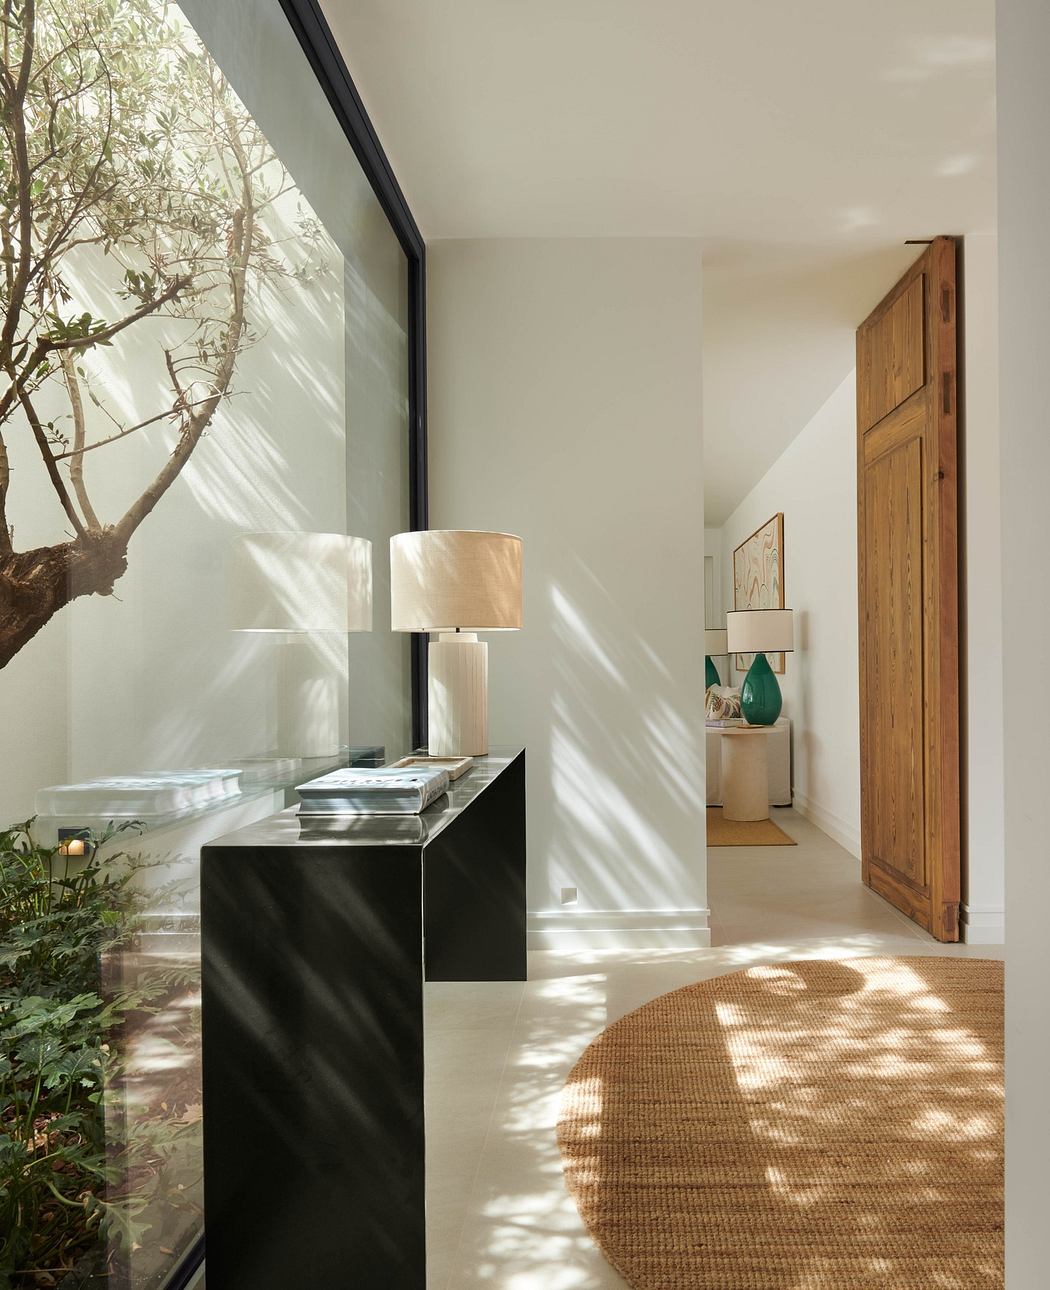 Modern interior hallway with sunlight casting shadows, including a sleek black console and large windows